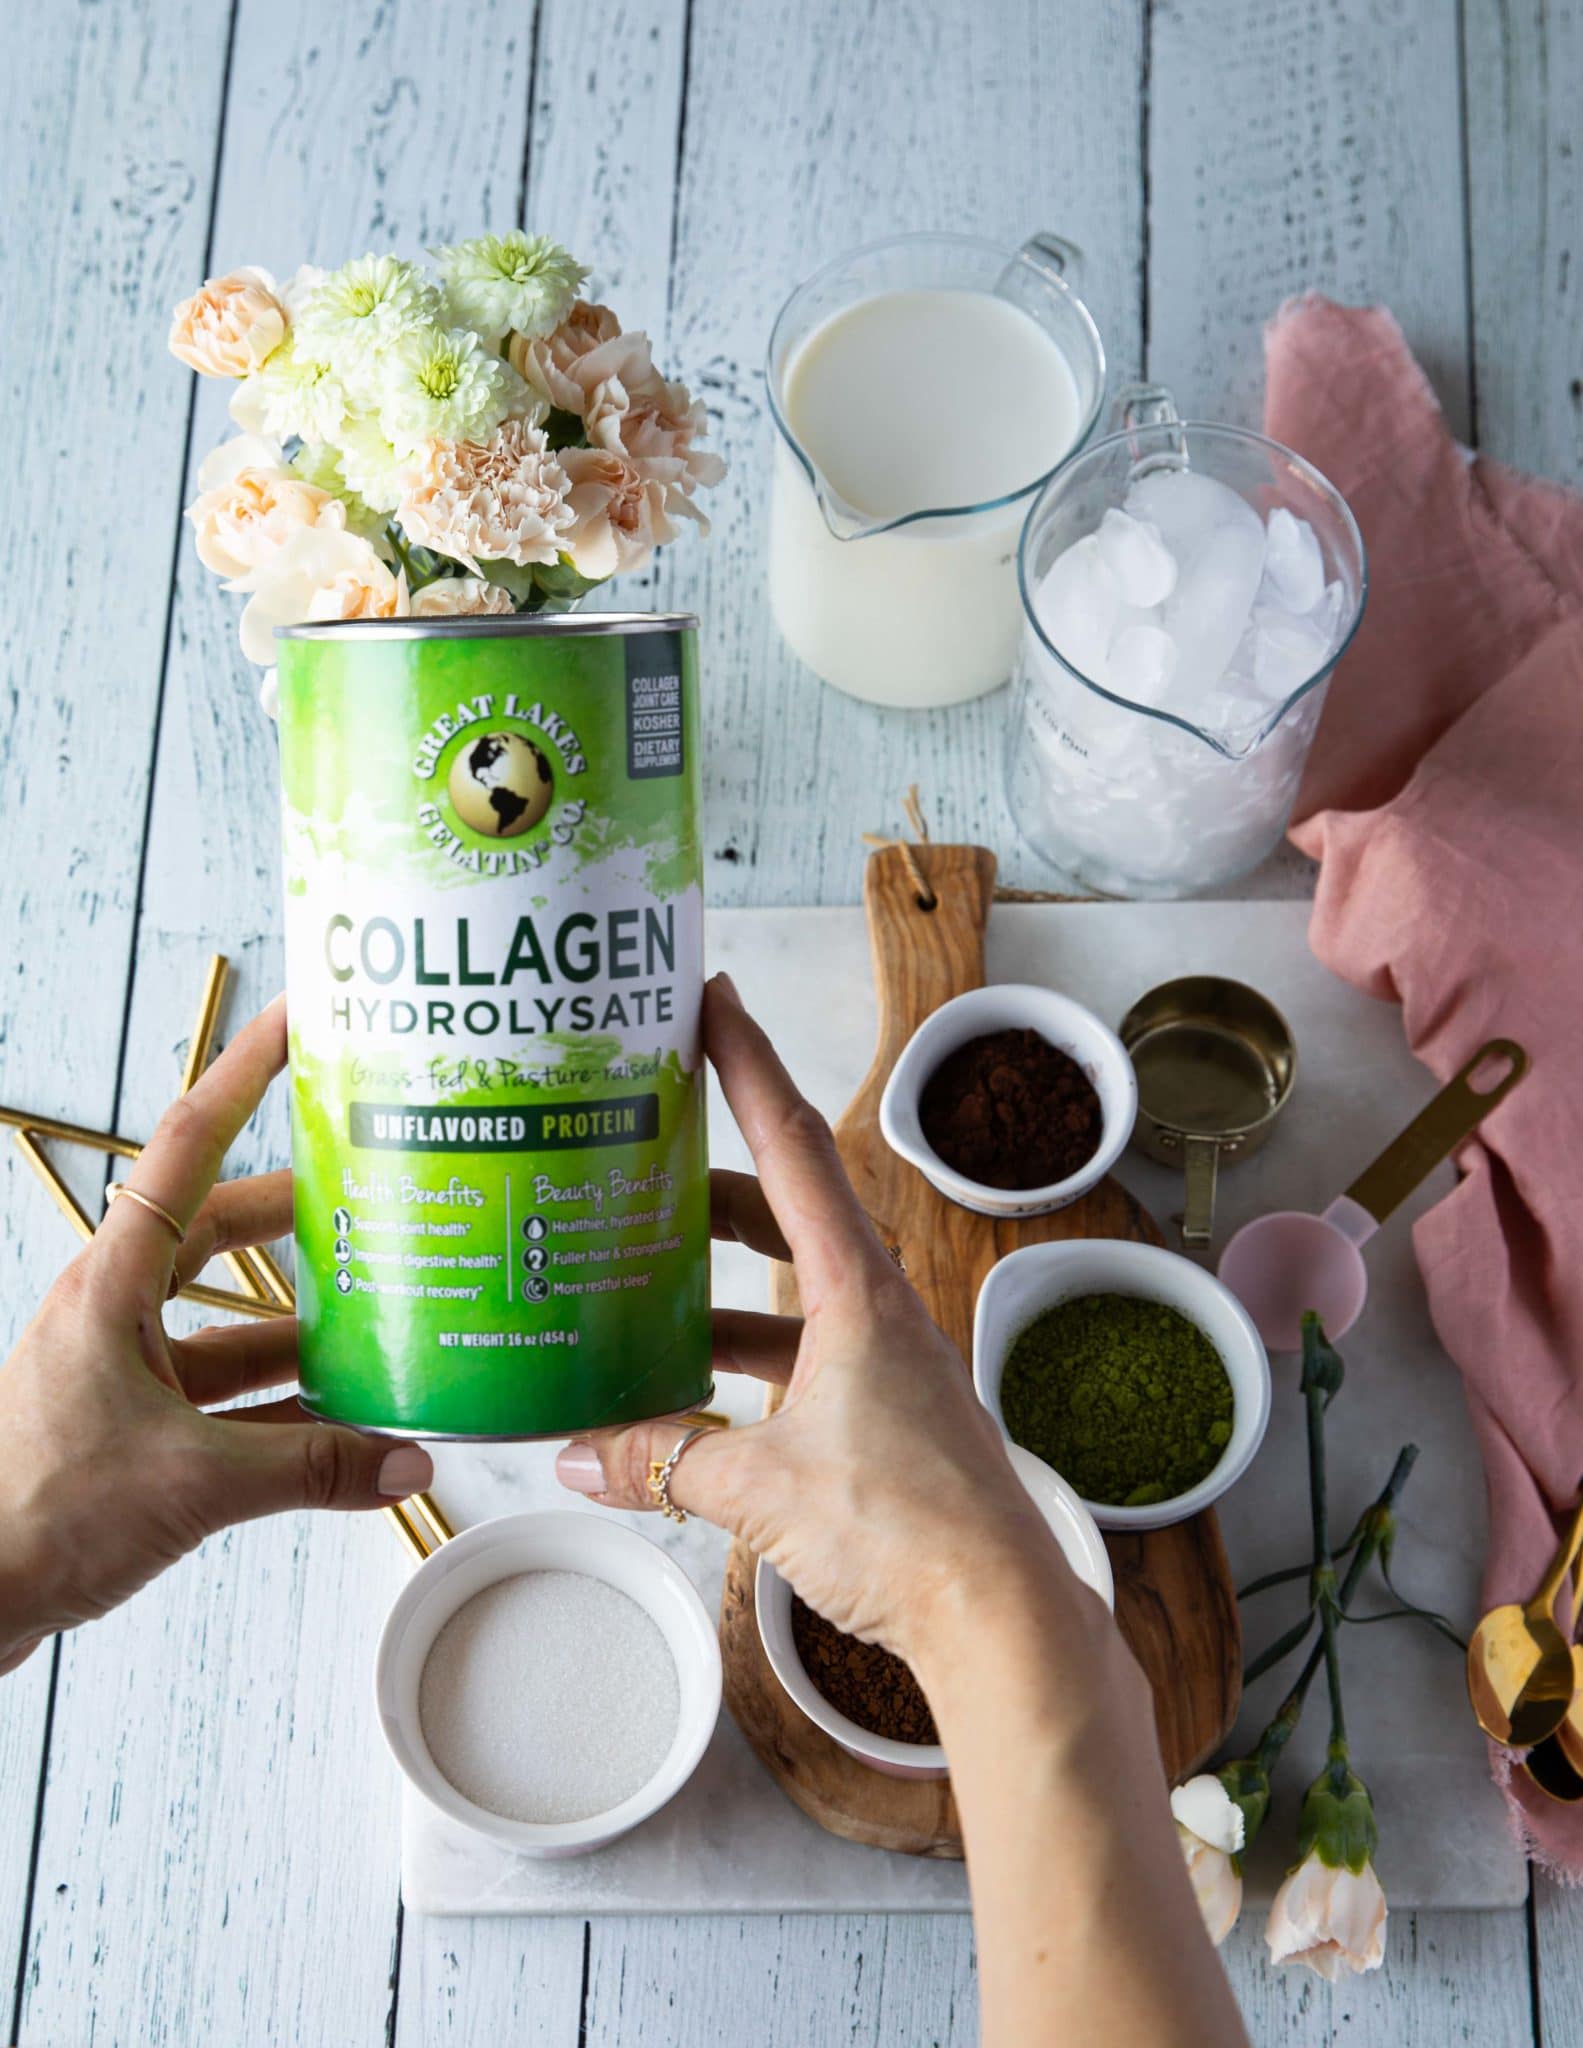 A hand holding a box of collagen to use and fortify the dalgona recipe